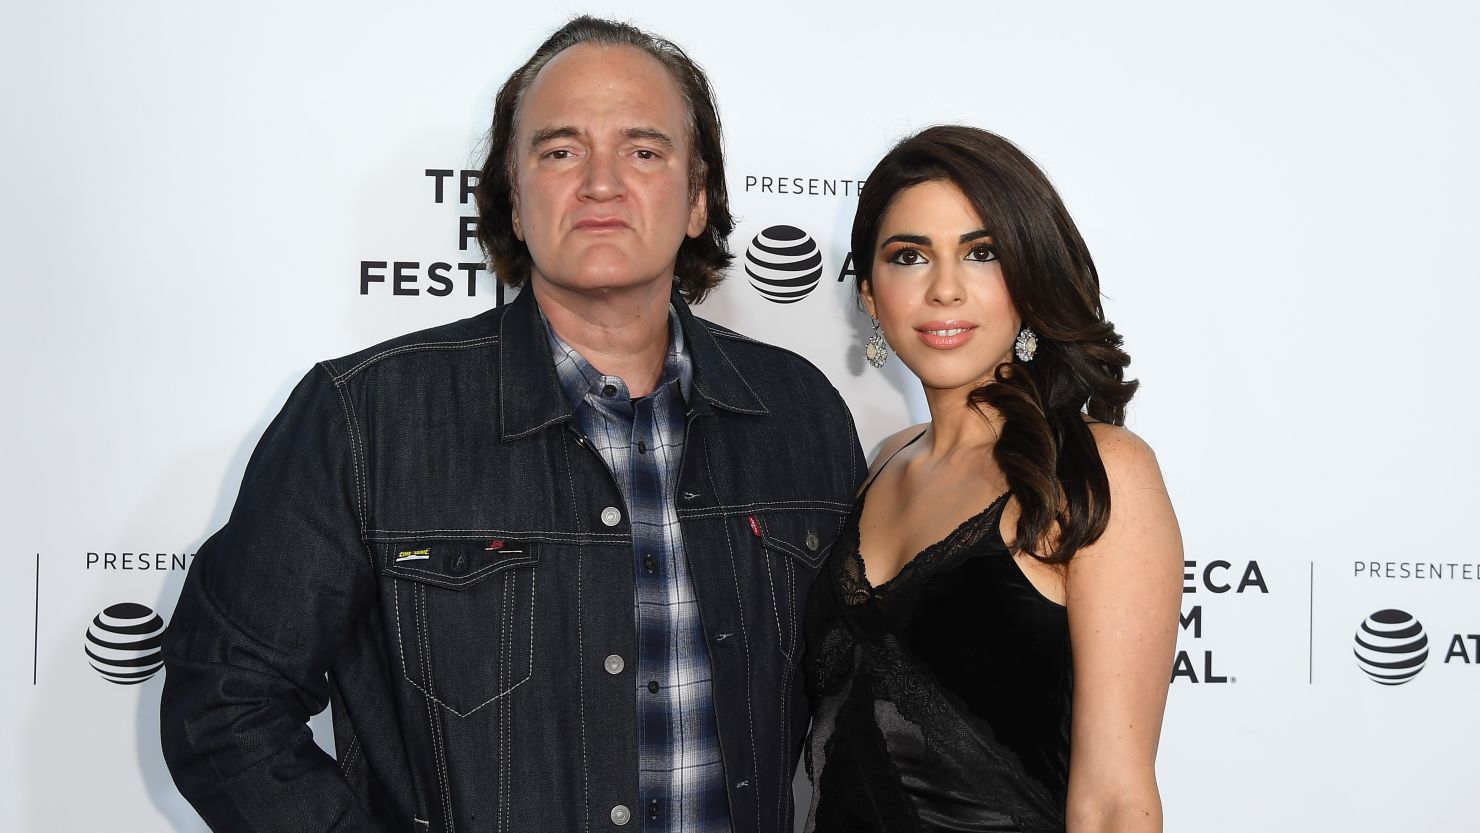 Director Quentin Tarantino and Singer/actress Daniella Pick attend the 'Reservoir Dogs' 25th Anniversary Screening during 2017 Tribeca Film Festival.